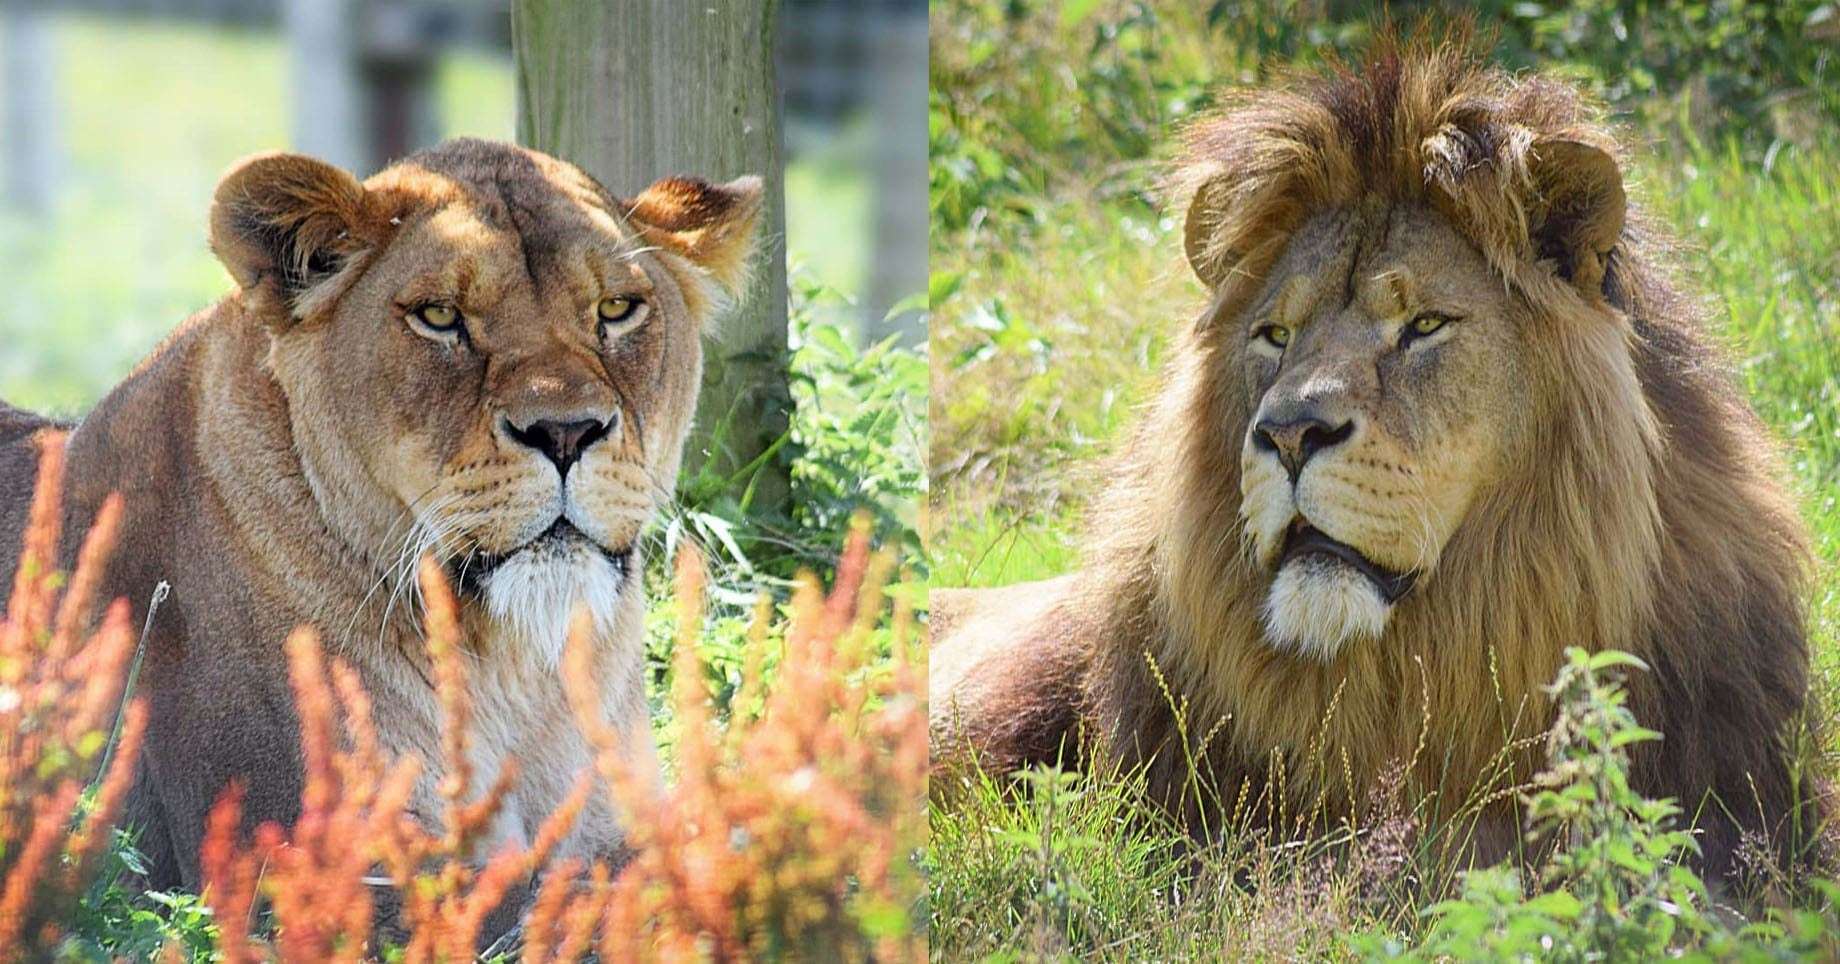 Wilma and Zulu are expected to arrive at Port Lympne in the coming days. Picture: Port Lympne